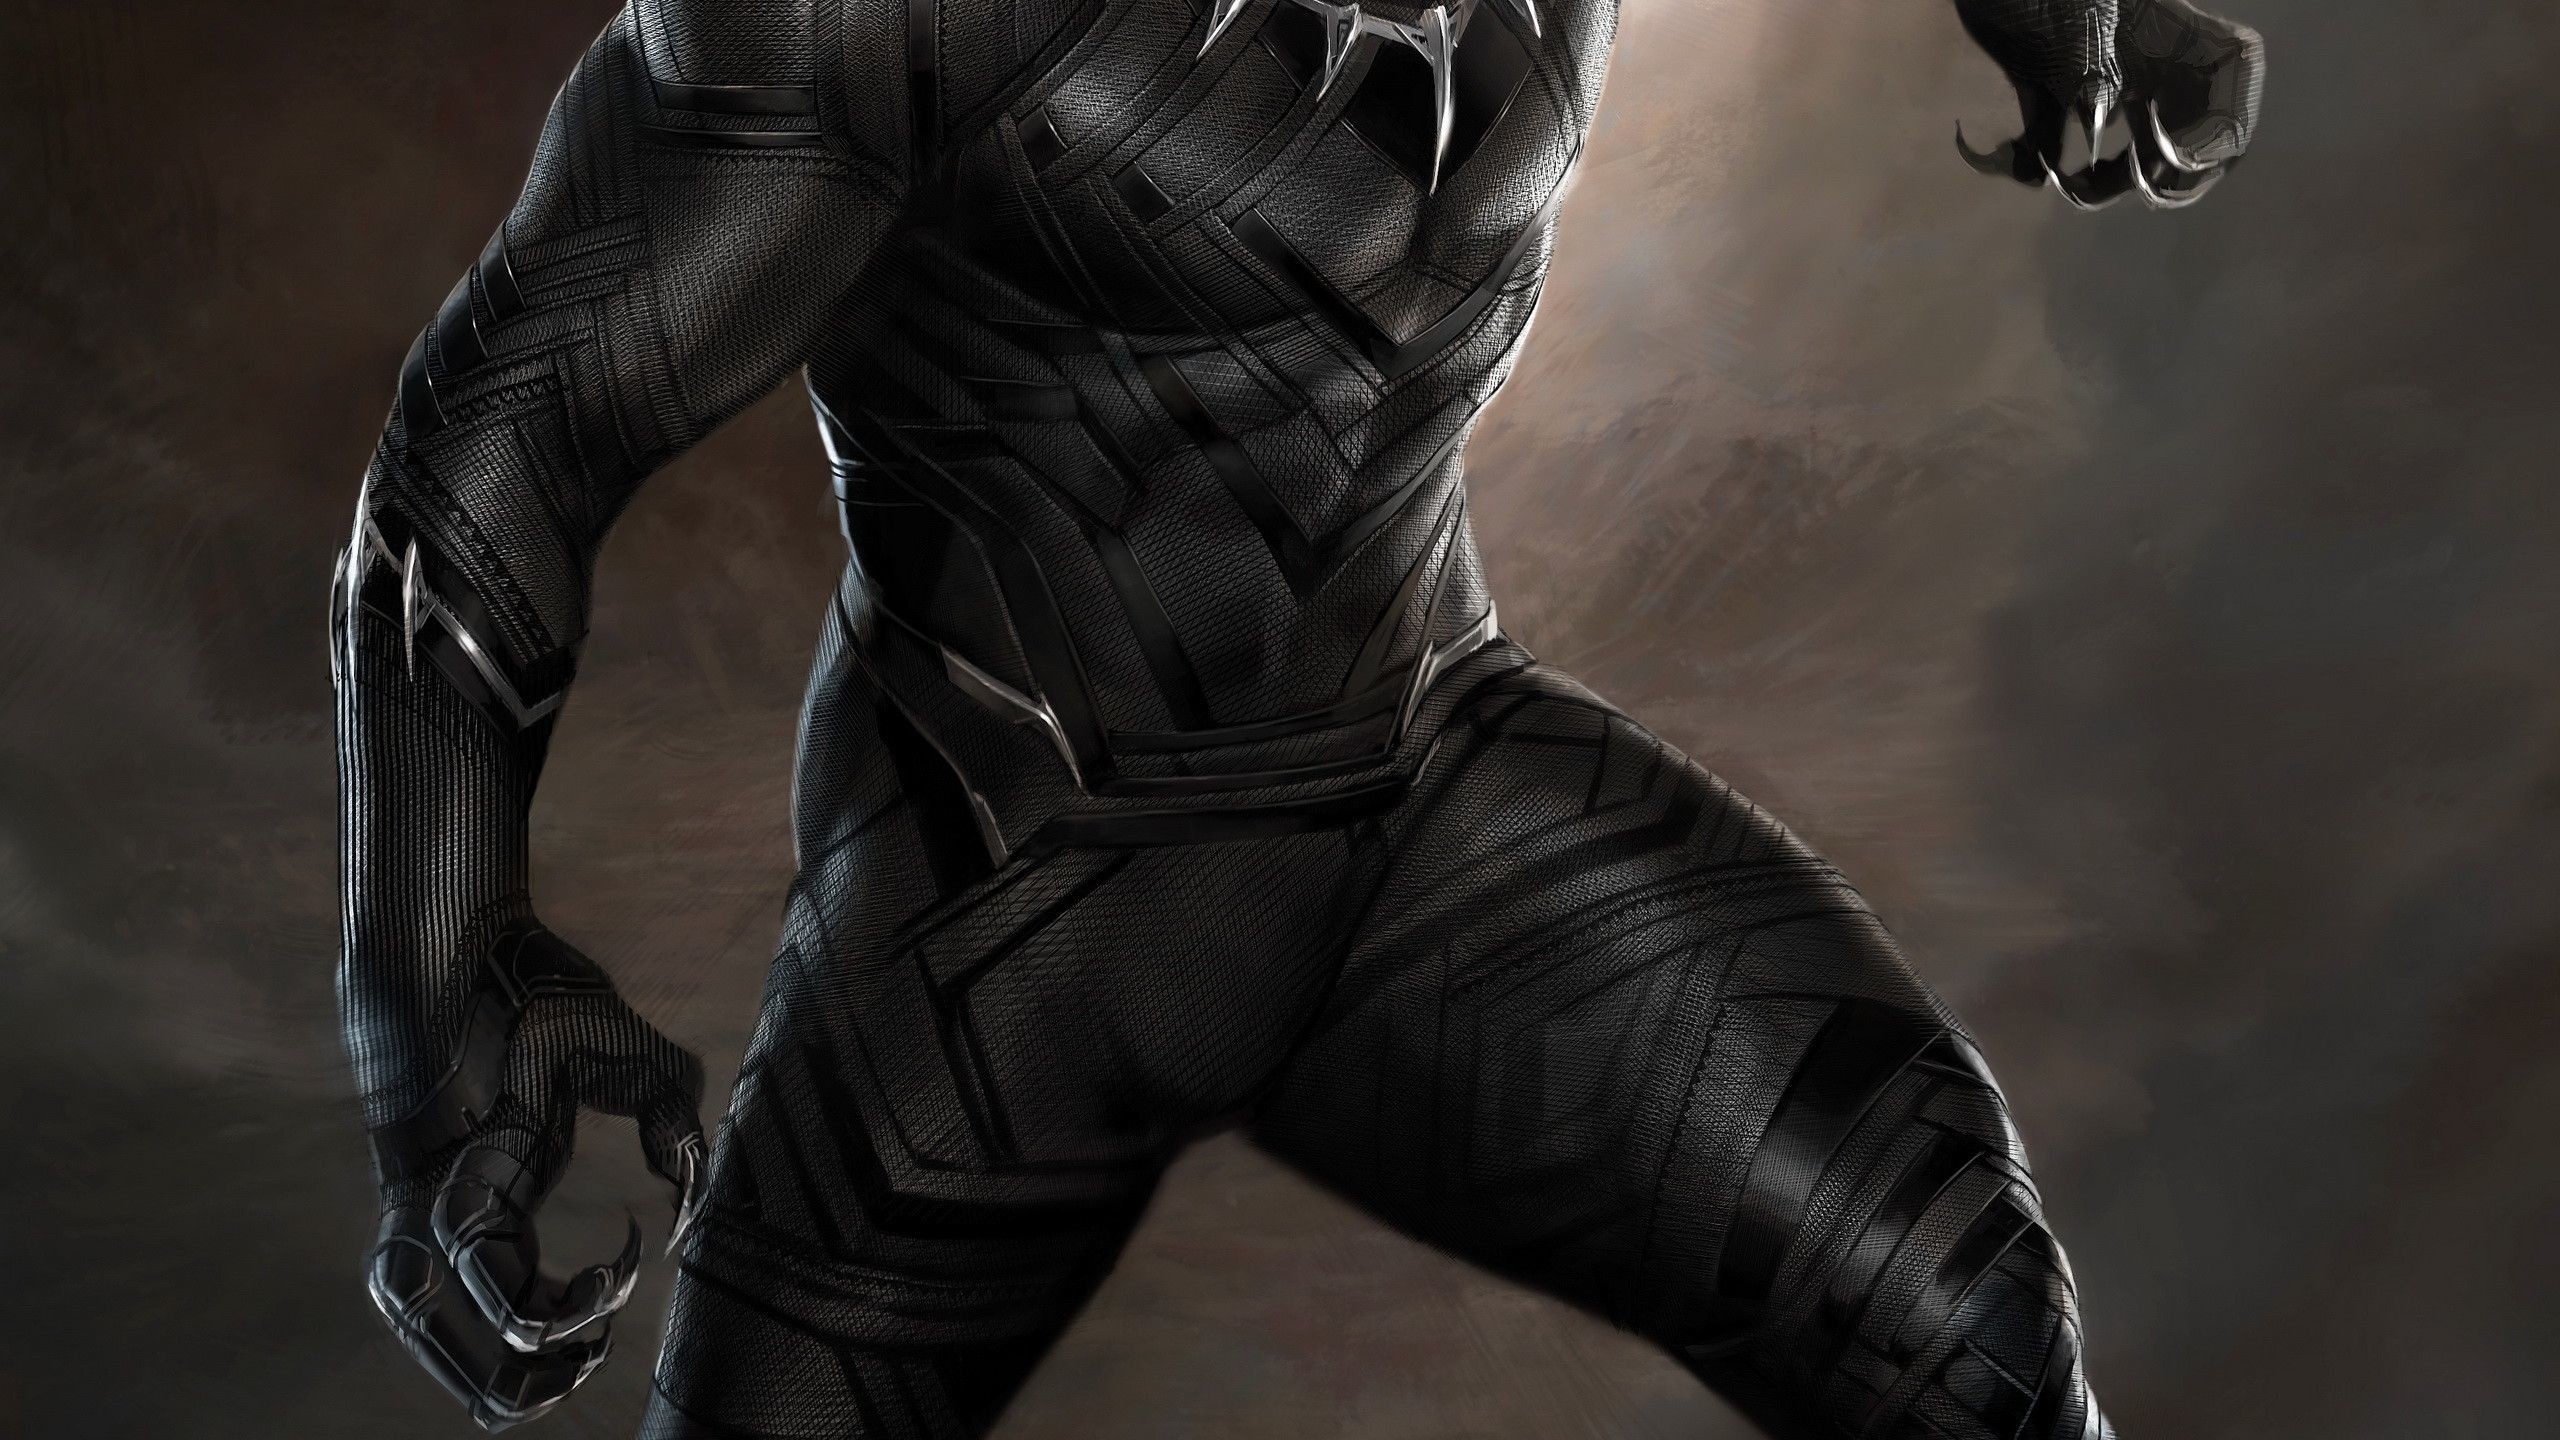 2560x1440 9172x5205 79 Black Panther HD Wallpapers | Background Images - Wallpaper  Abyss">